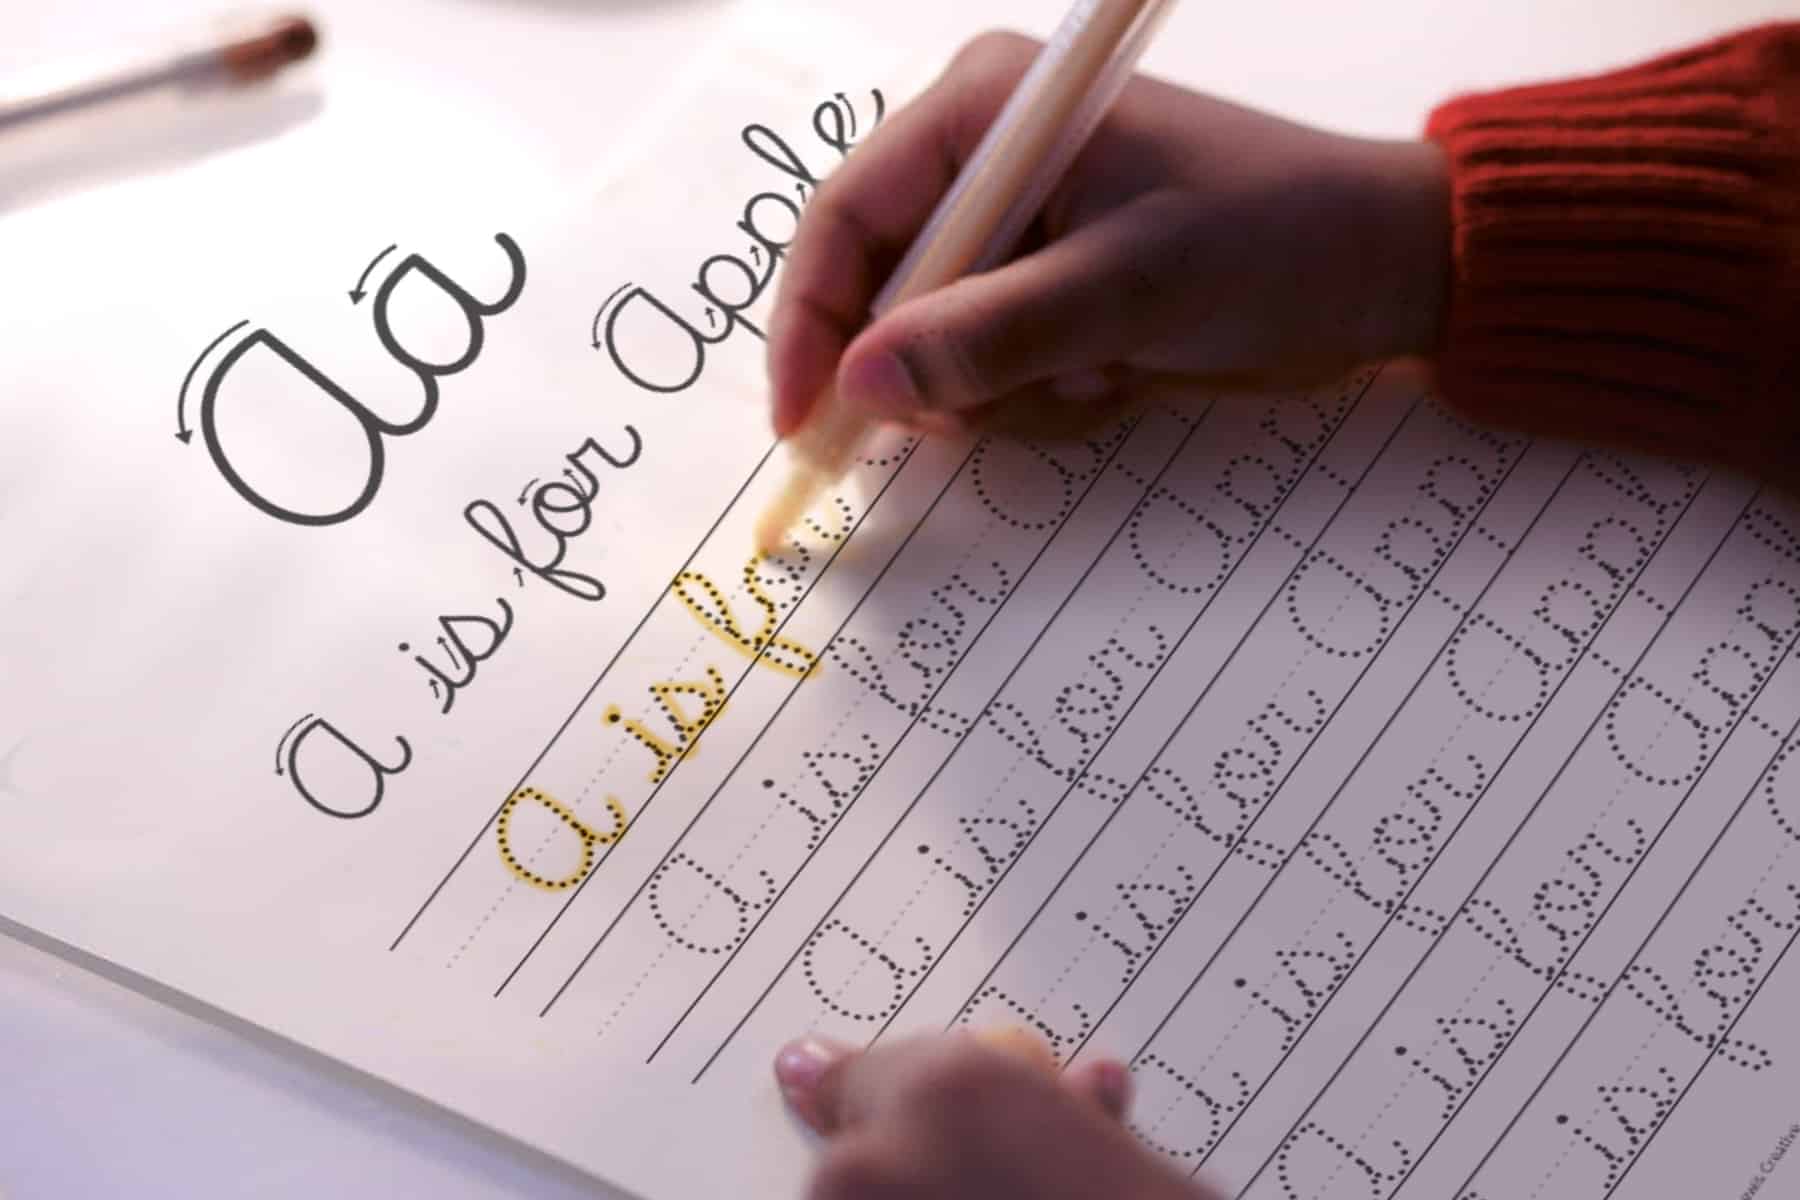 Cursive Tracing Sheet Generator - A is for Apple